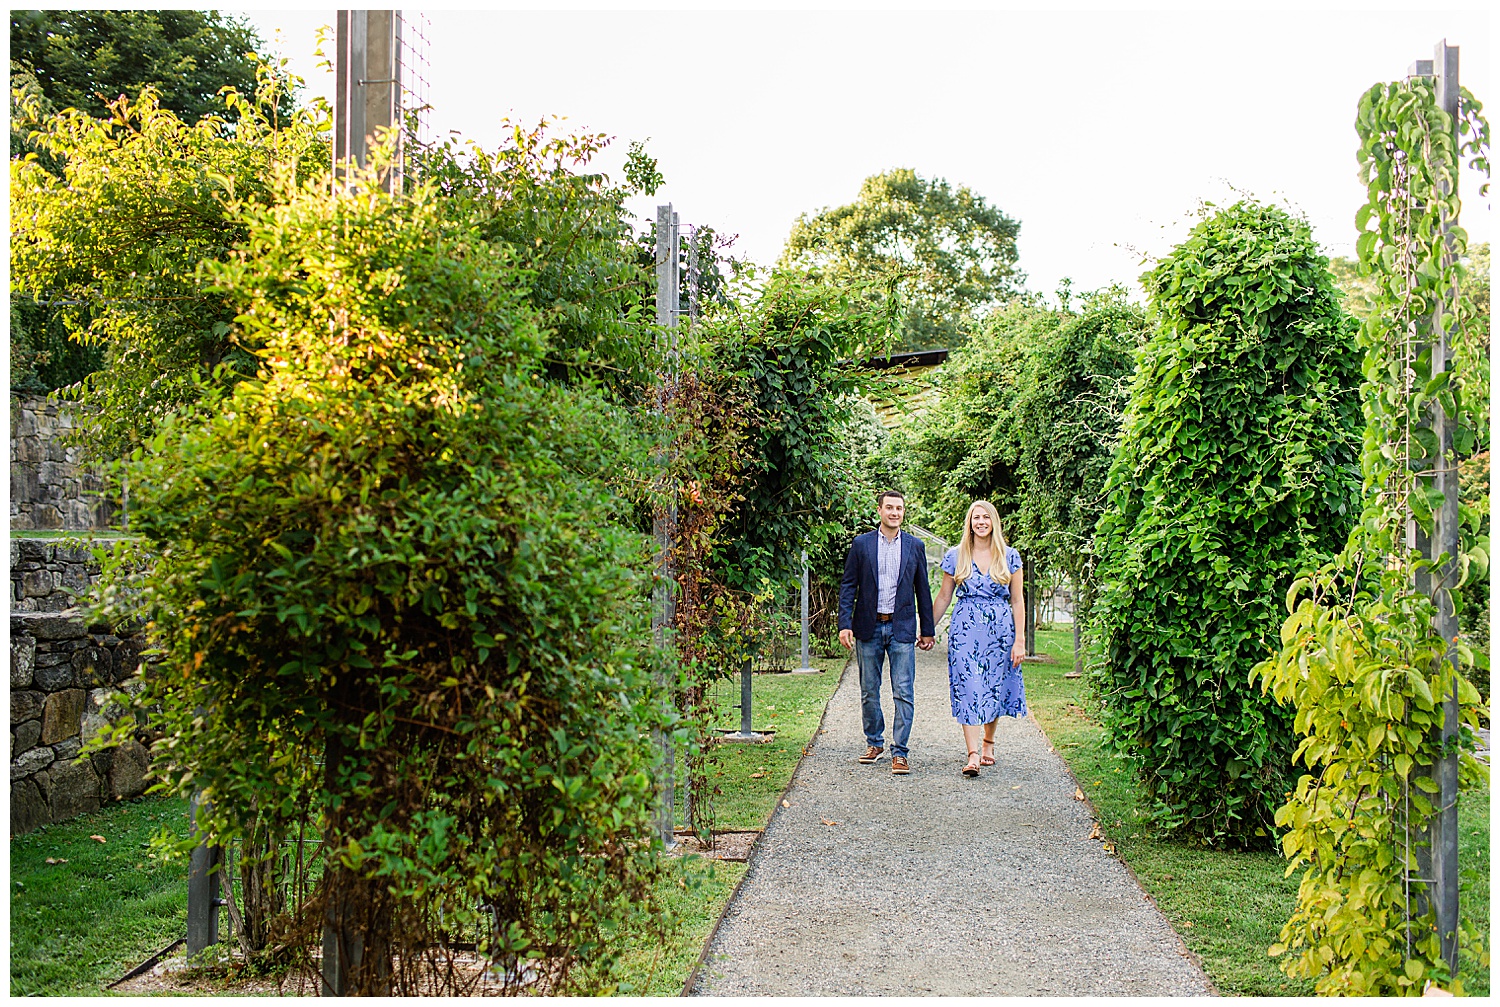 Couple walk down arboretum path surrounded by greenery